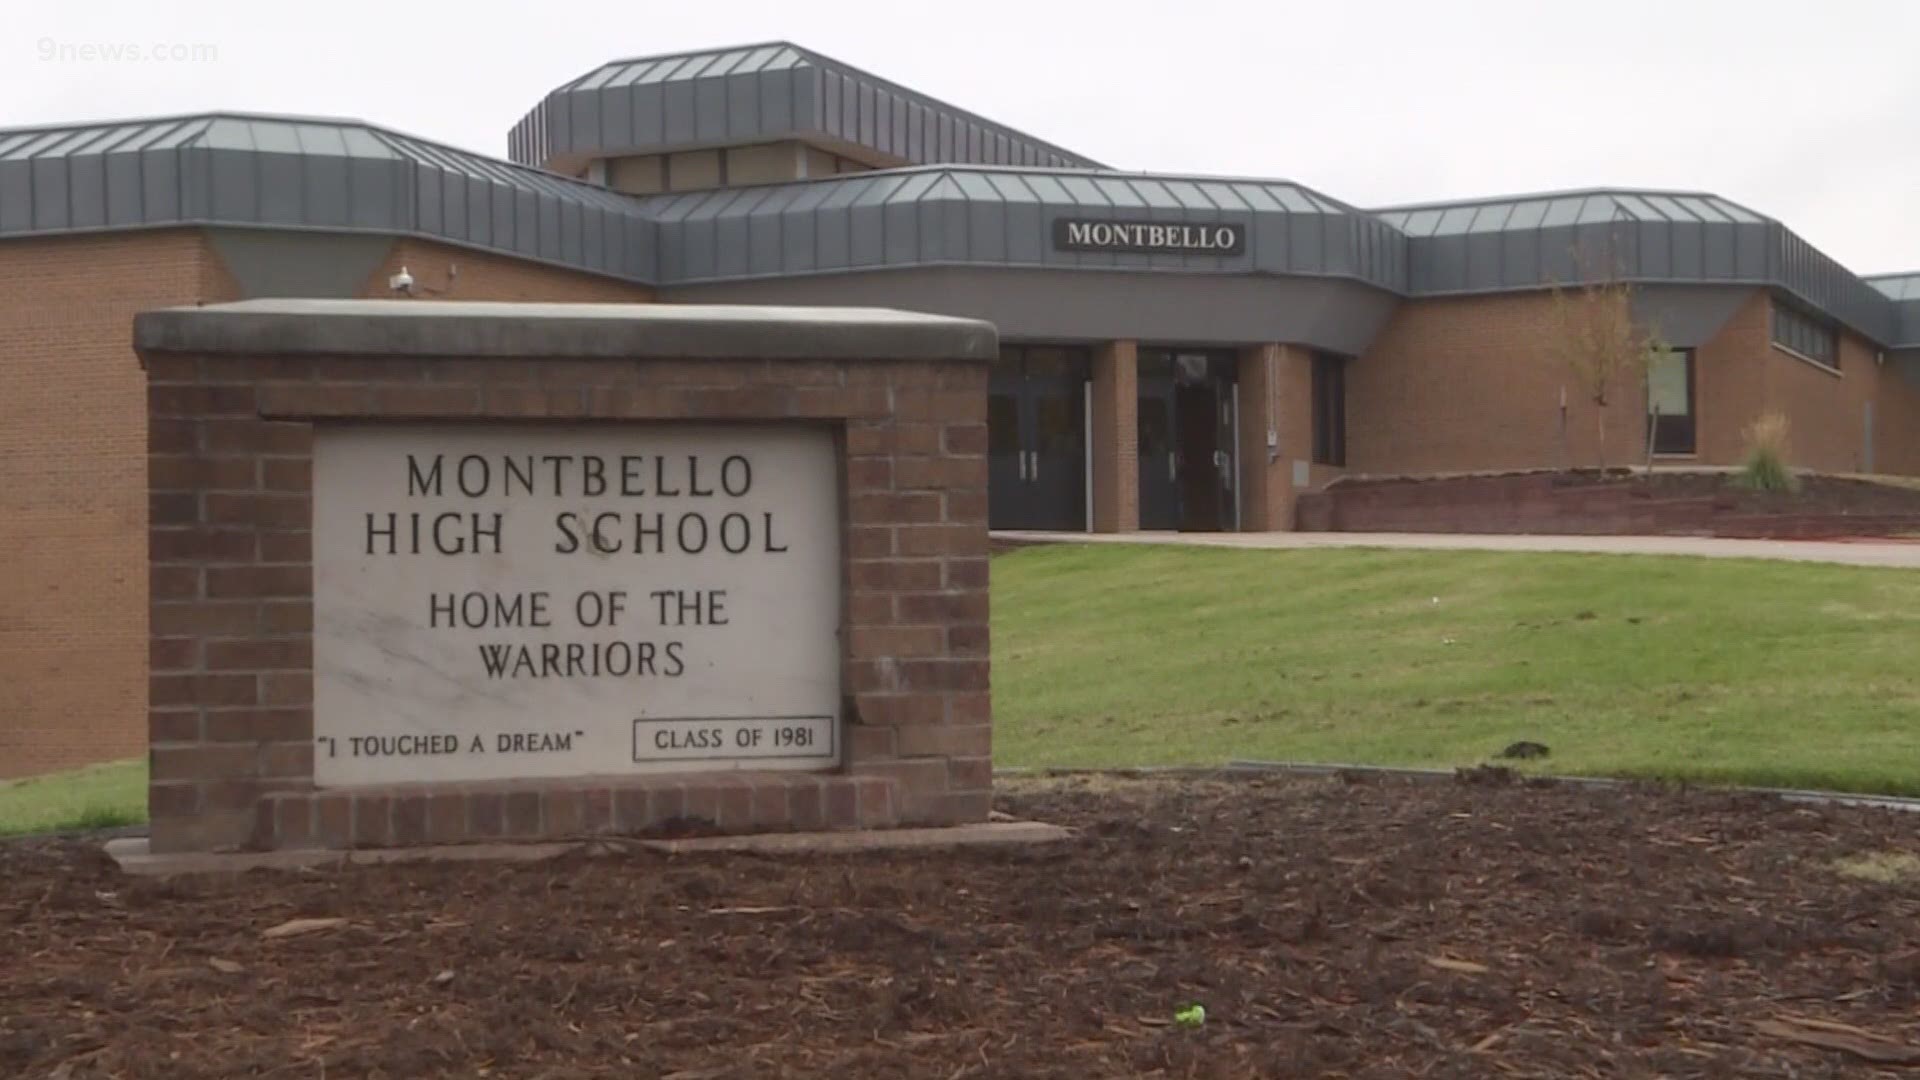 The Montbello campus was transformed into multiple schools, instead of one high school. Now, that will change.